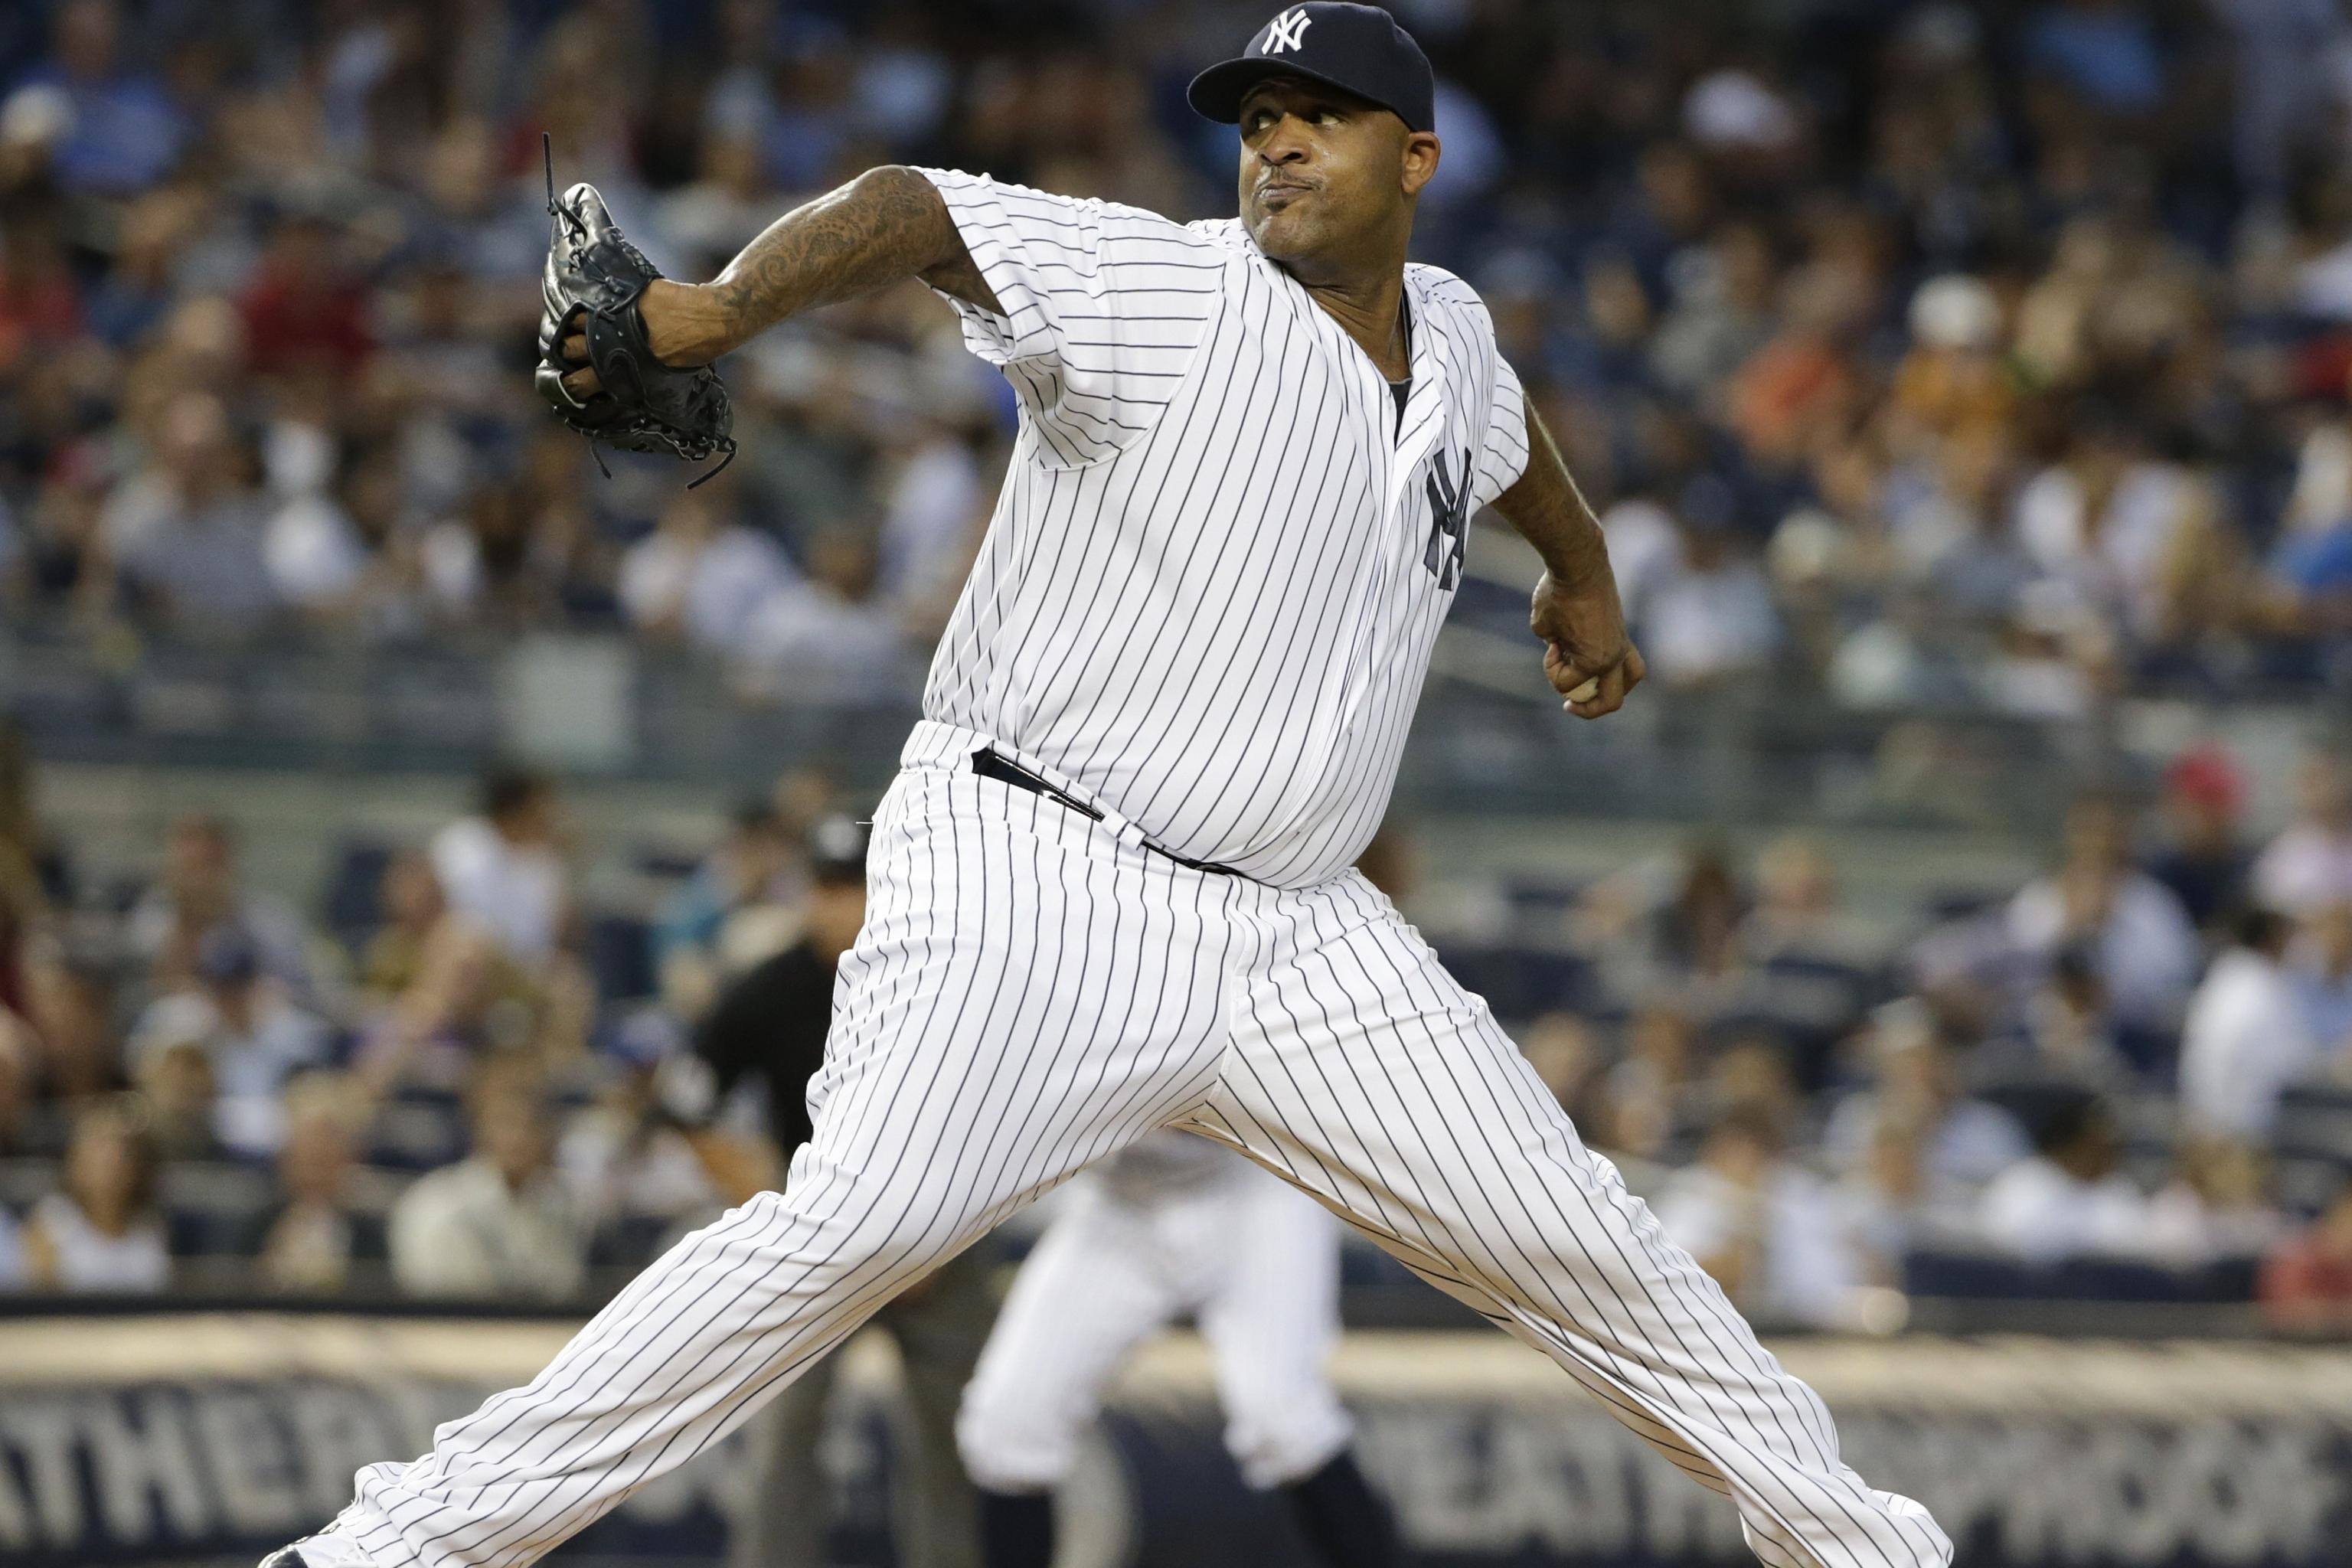 All-Star Pitcher CC Sabathia Reckons With the Toll of Alcoholism - WSJ